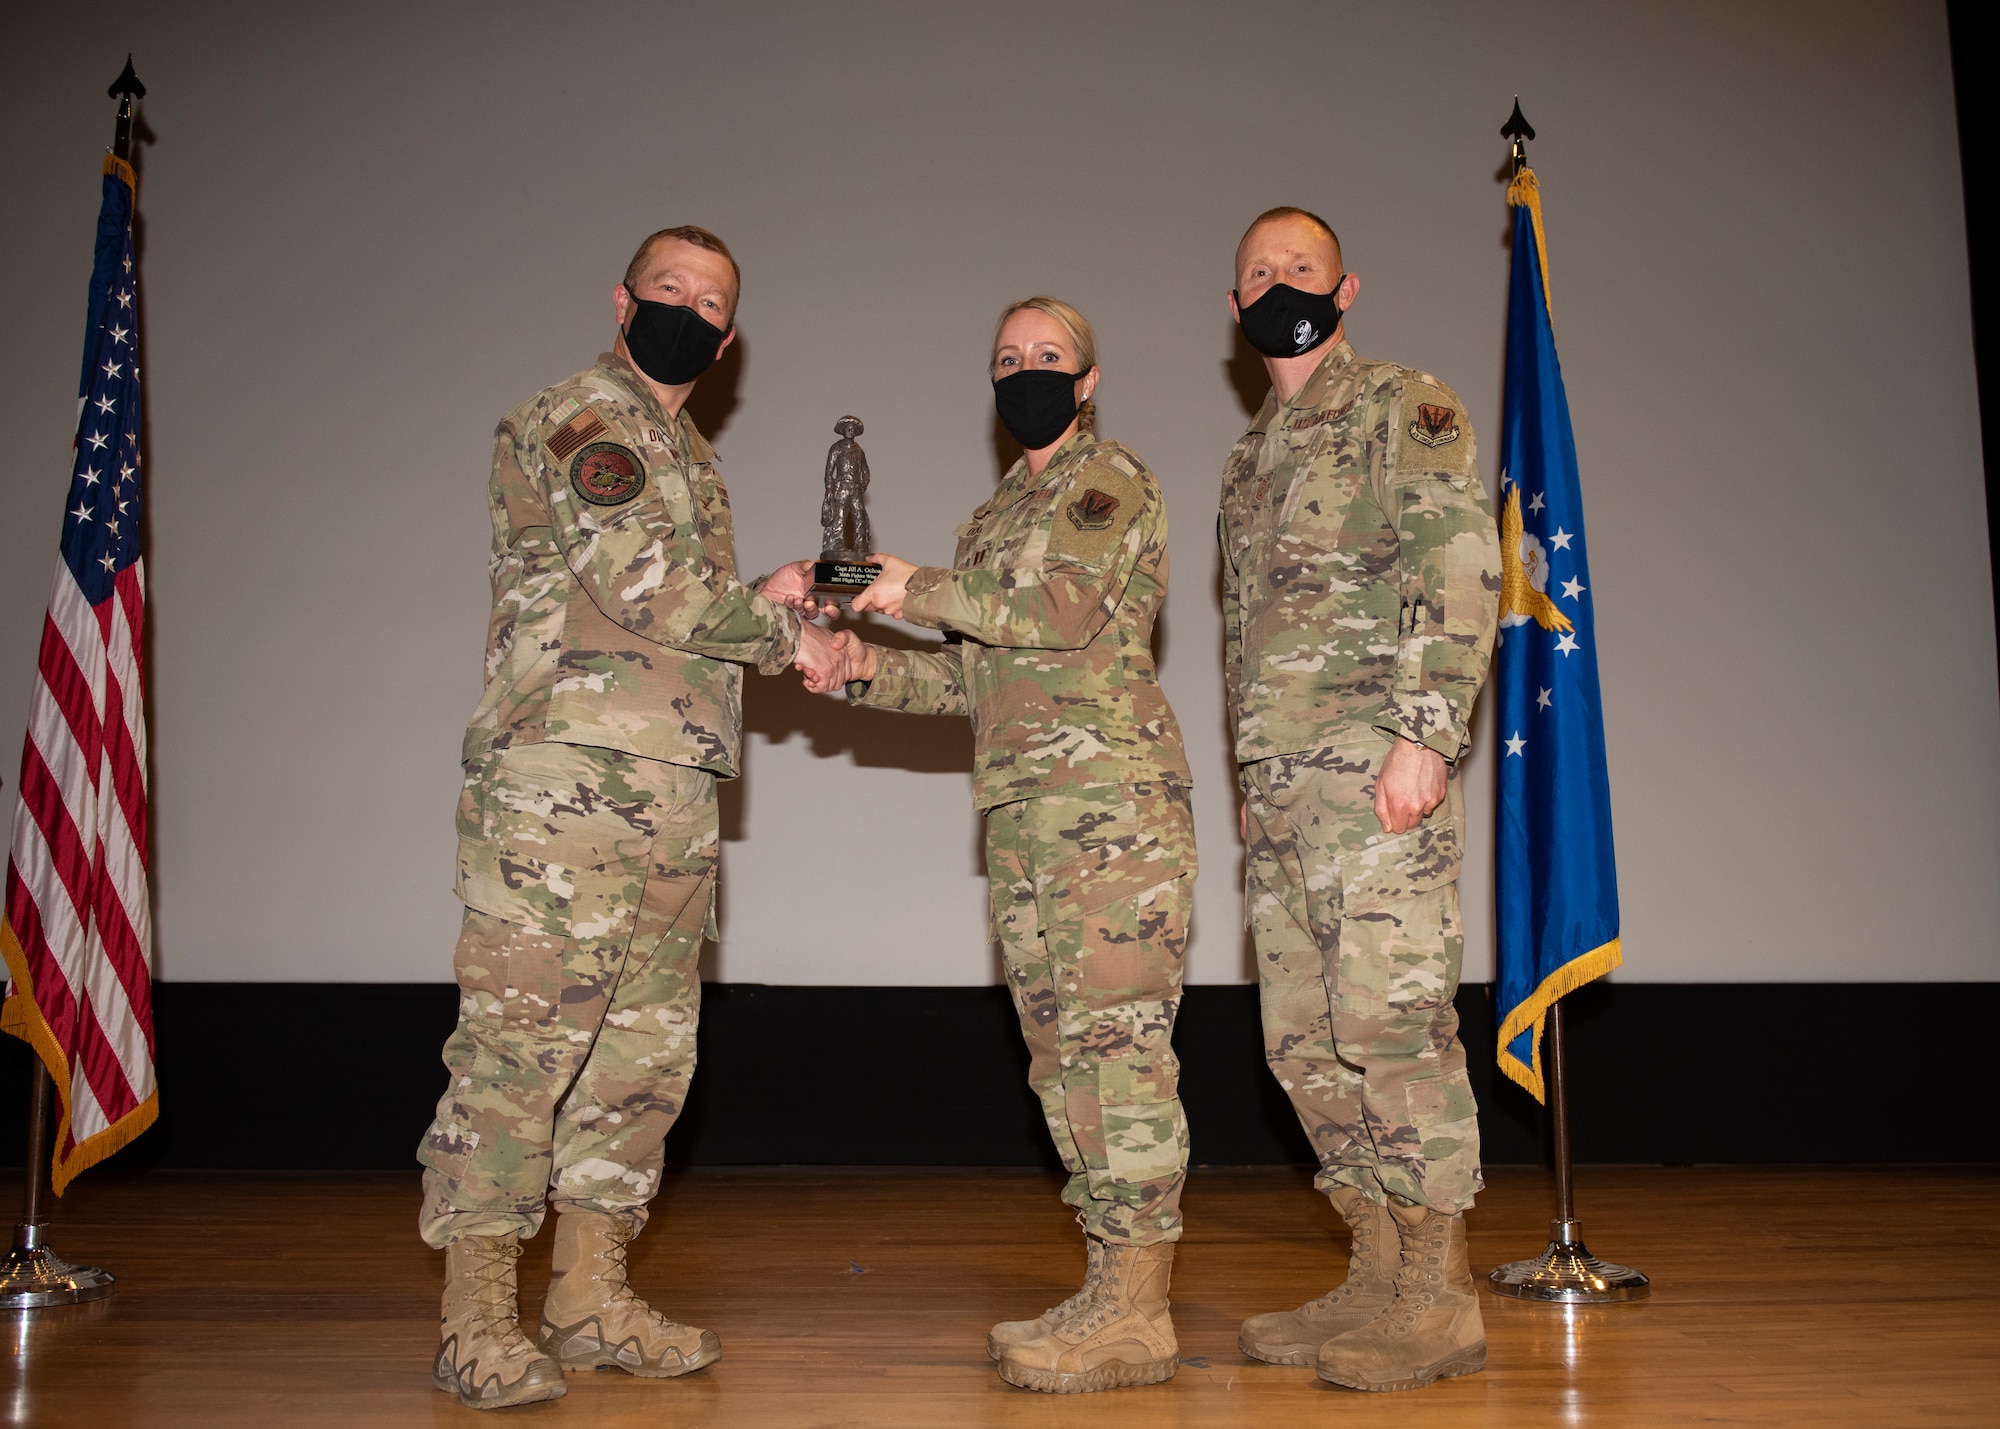 Three Airmen pose for a photo with a trophy.